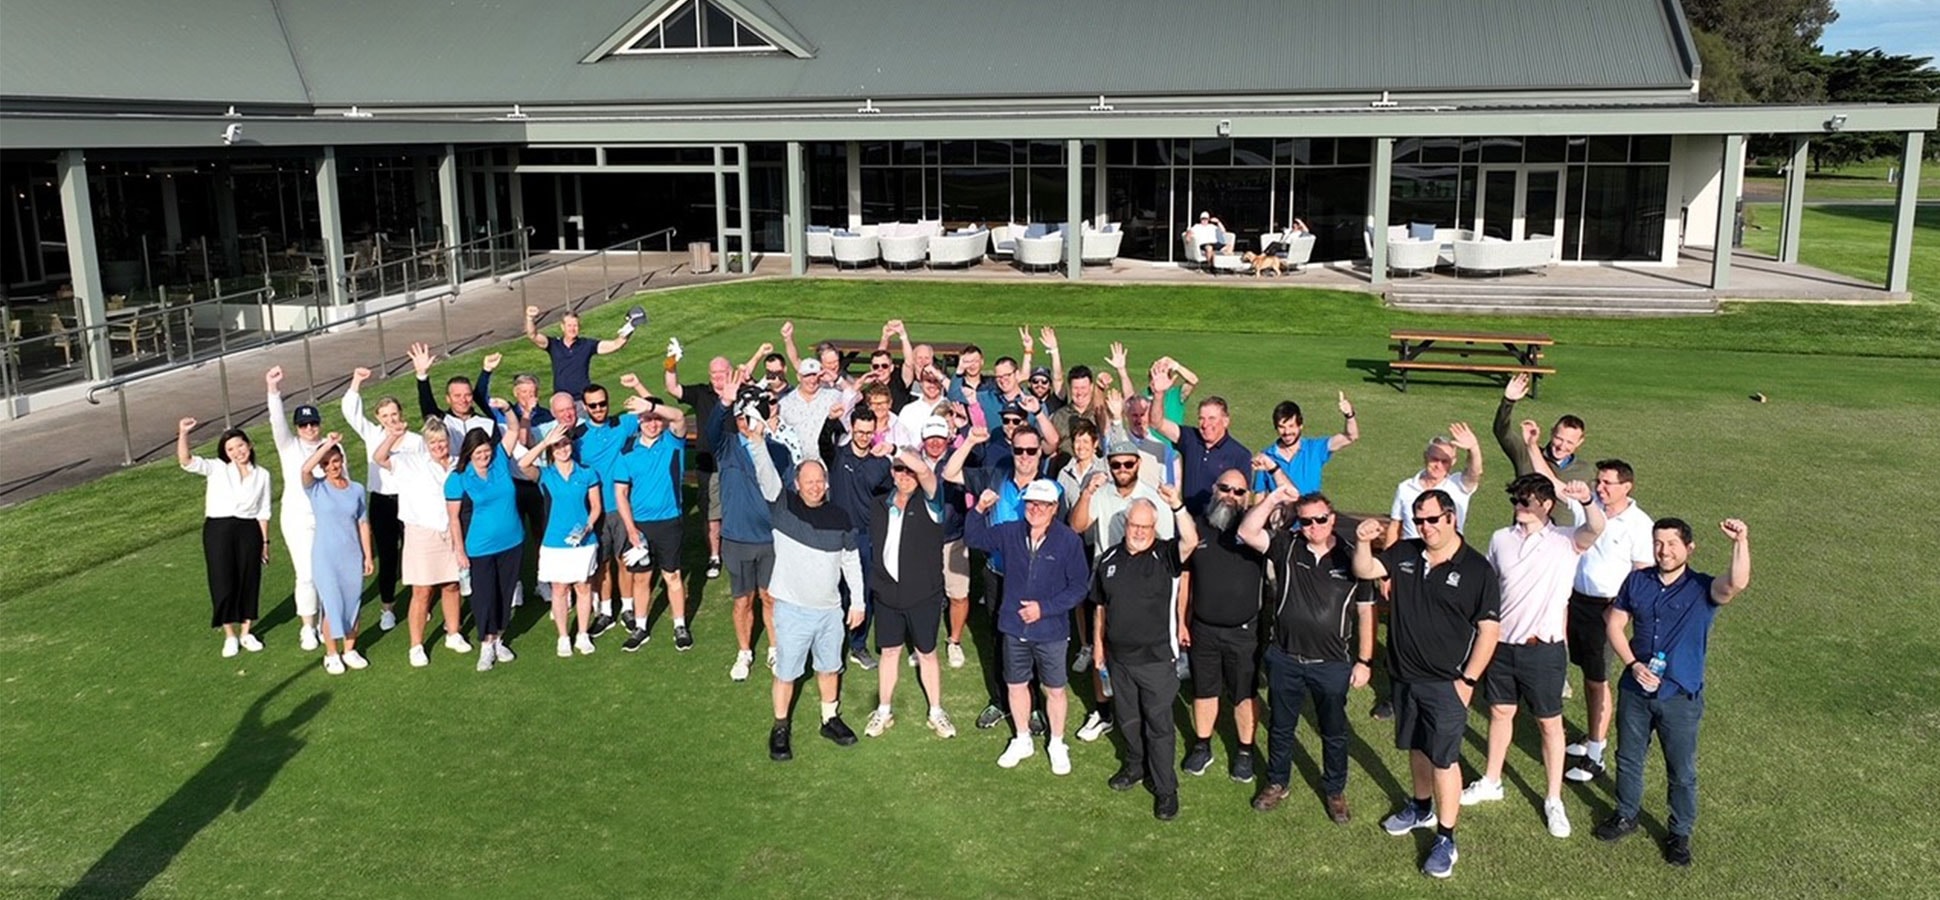 St John of God Geelong Hosptial Golf Day proudly presented by Lake Imaging and held at the scenic 13th Beach Golf Links